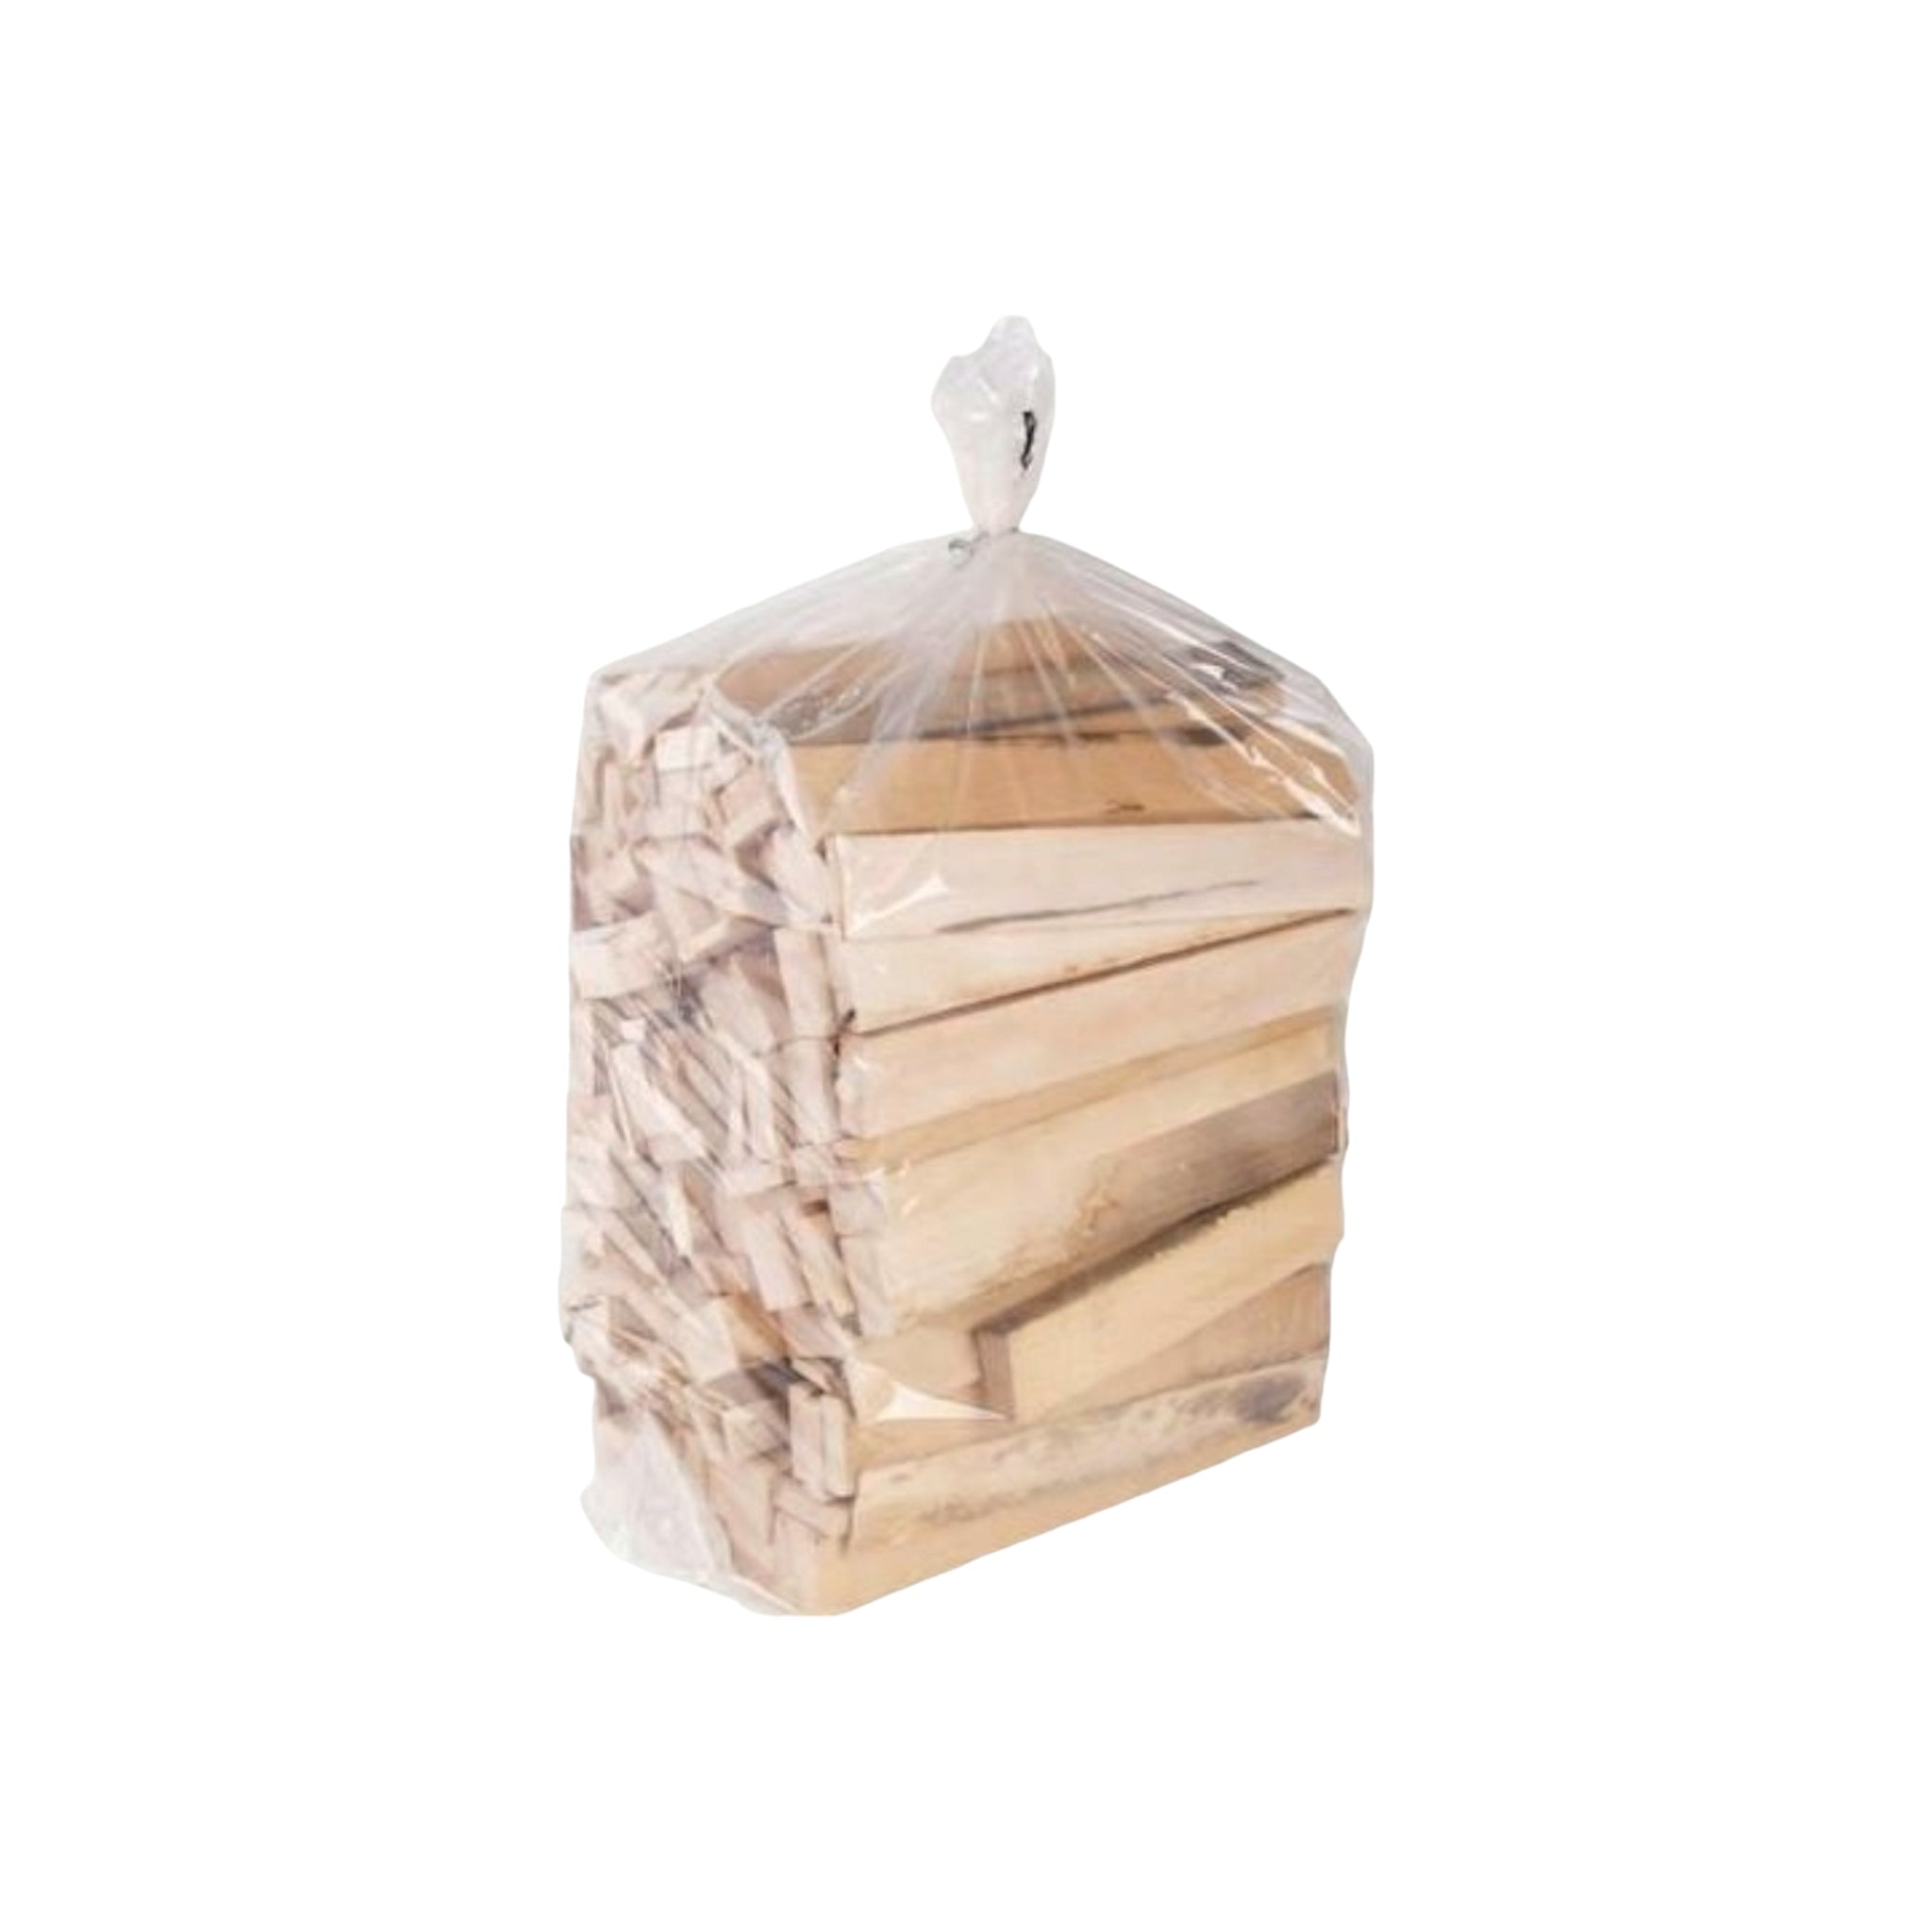 Plastic Bag 360x800mm 75microns 11kg Ice Bags 100pack